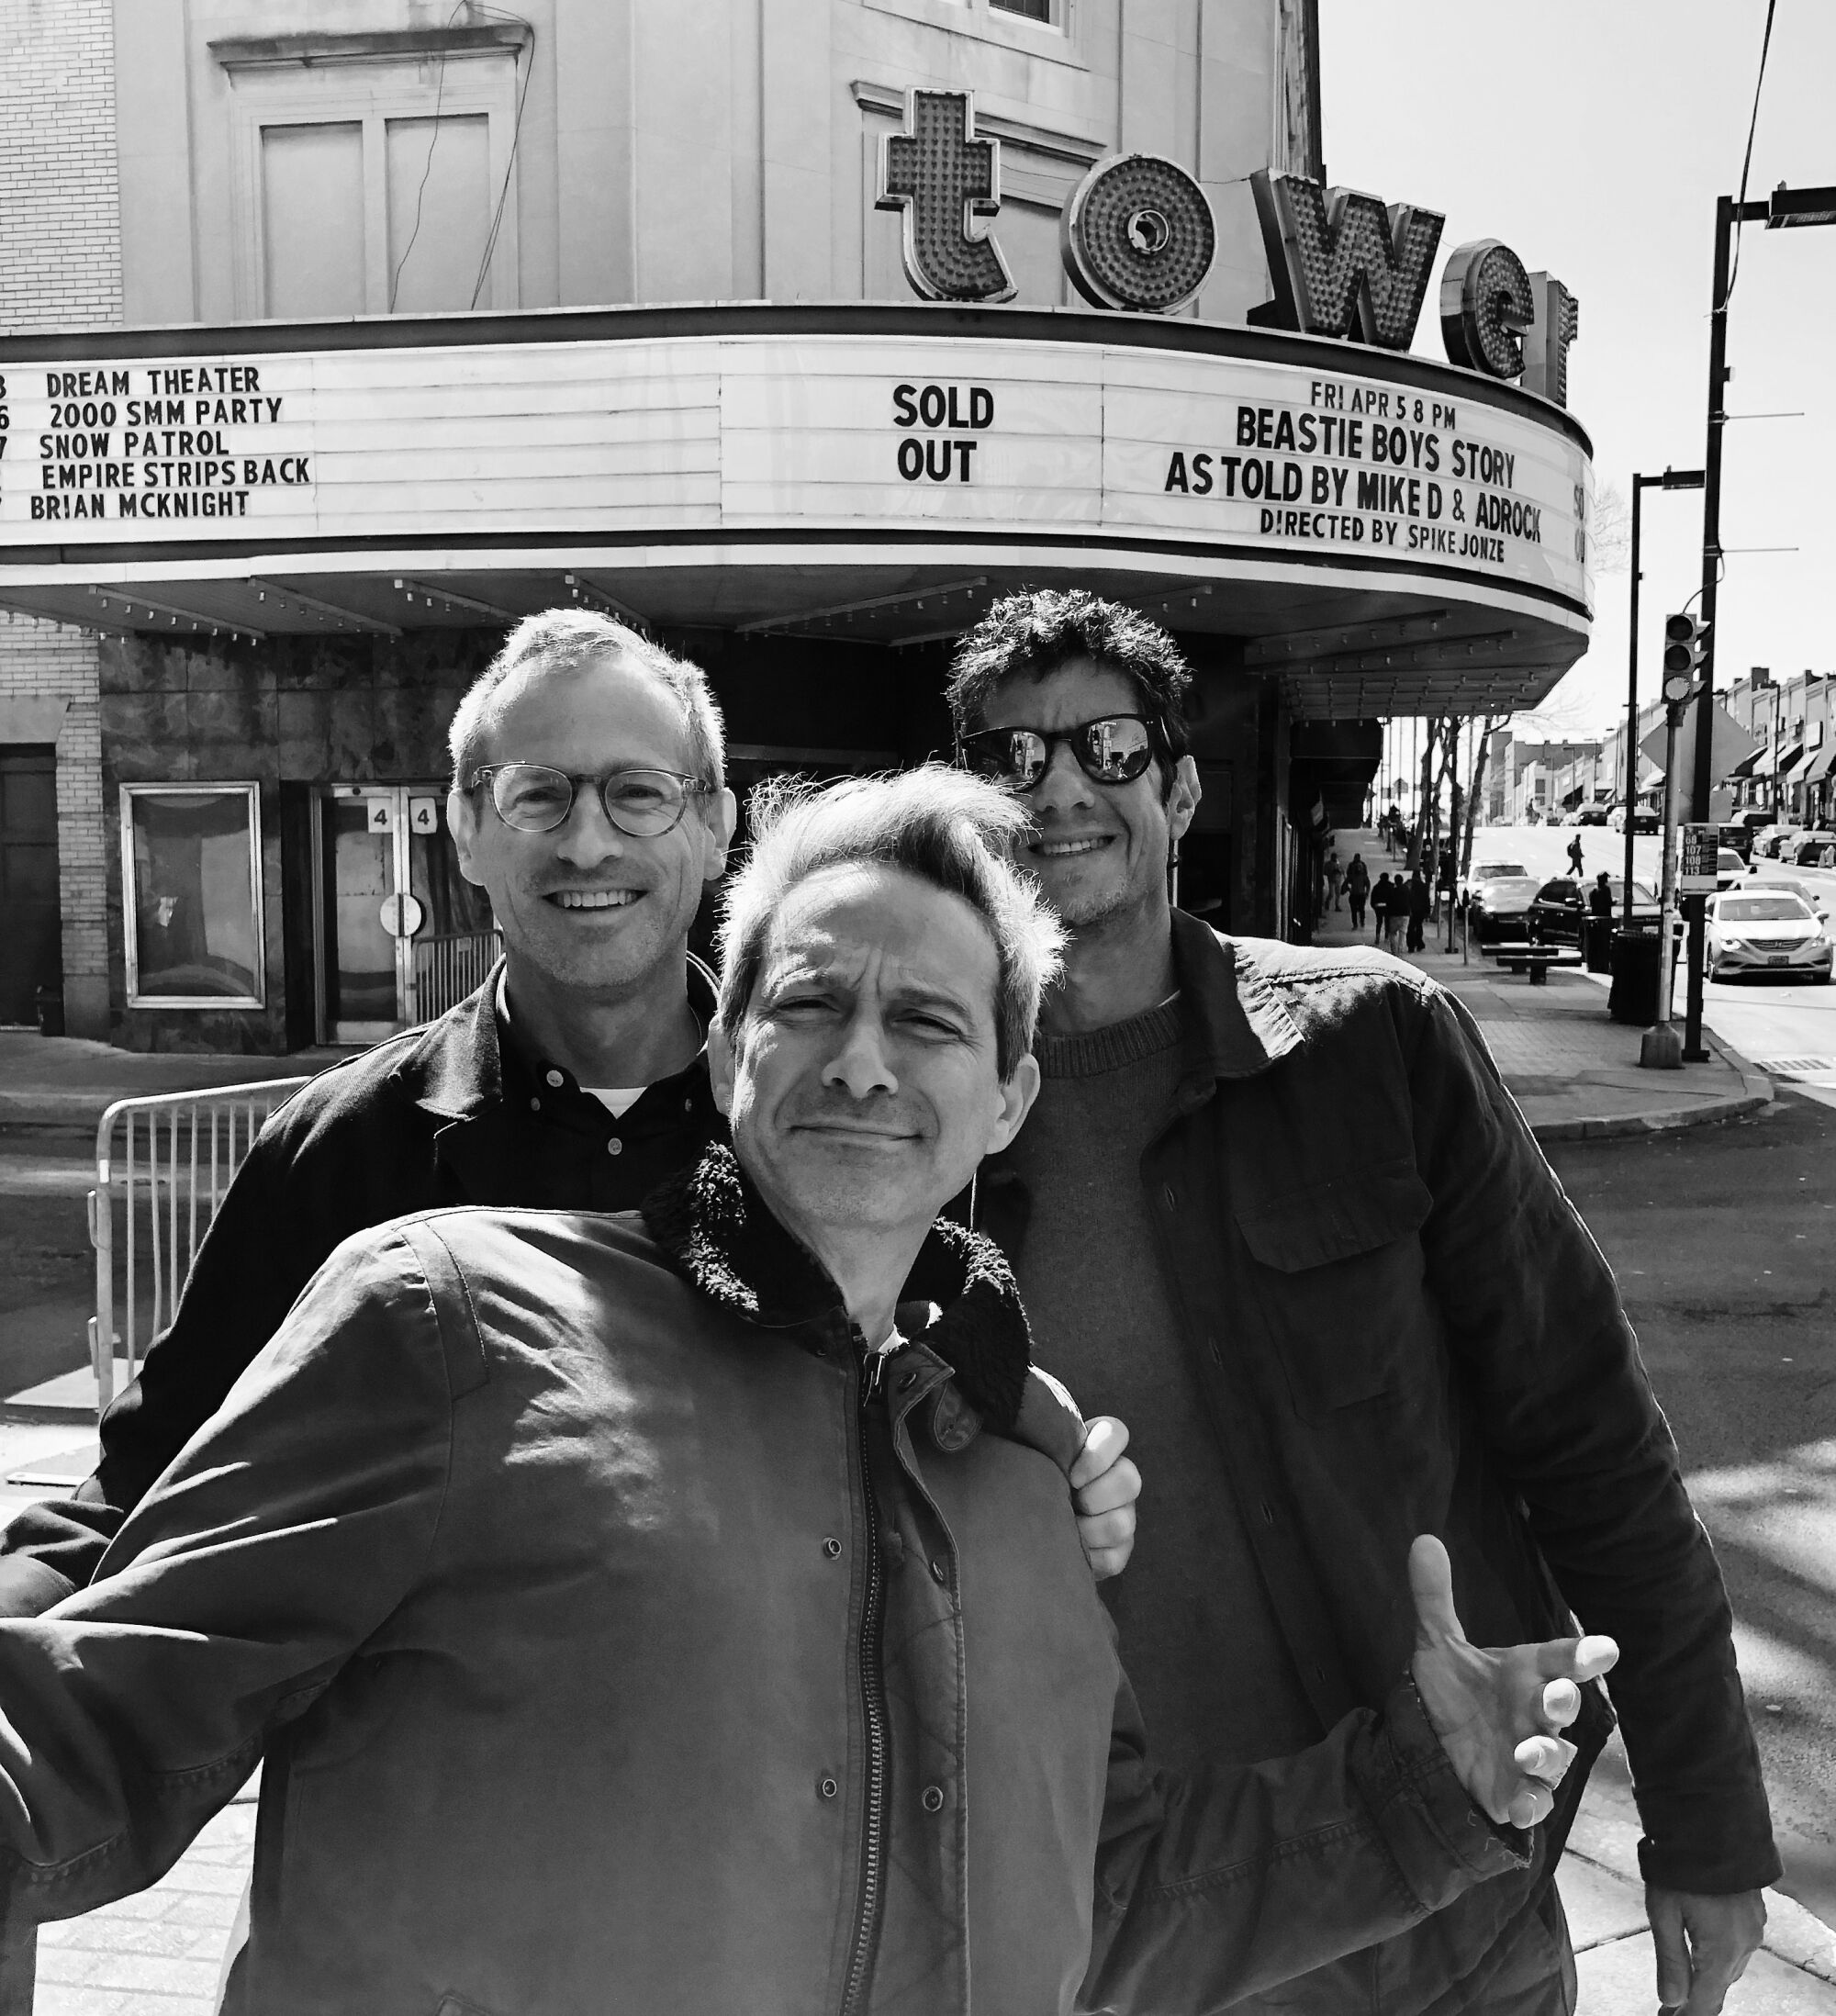 Director Spike Jonze(left) with Adam Horovitz and Mike Diamond of the Beastie Boys mug for the camera in front of the Tower Theater in Philadelphia where part of "Beastie Boys Story" was filmed.